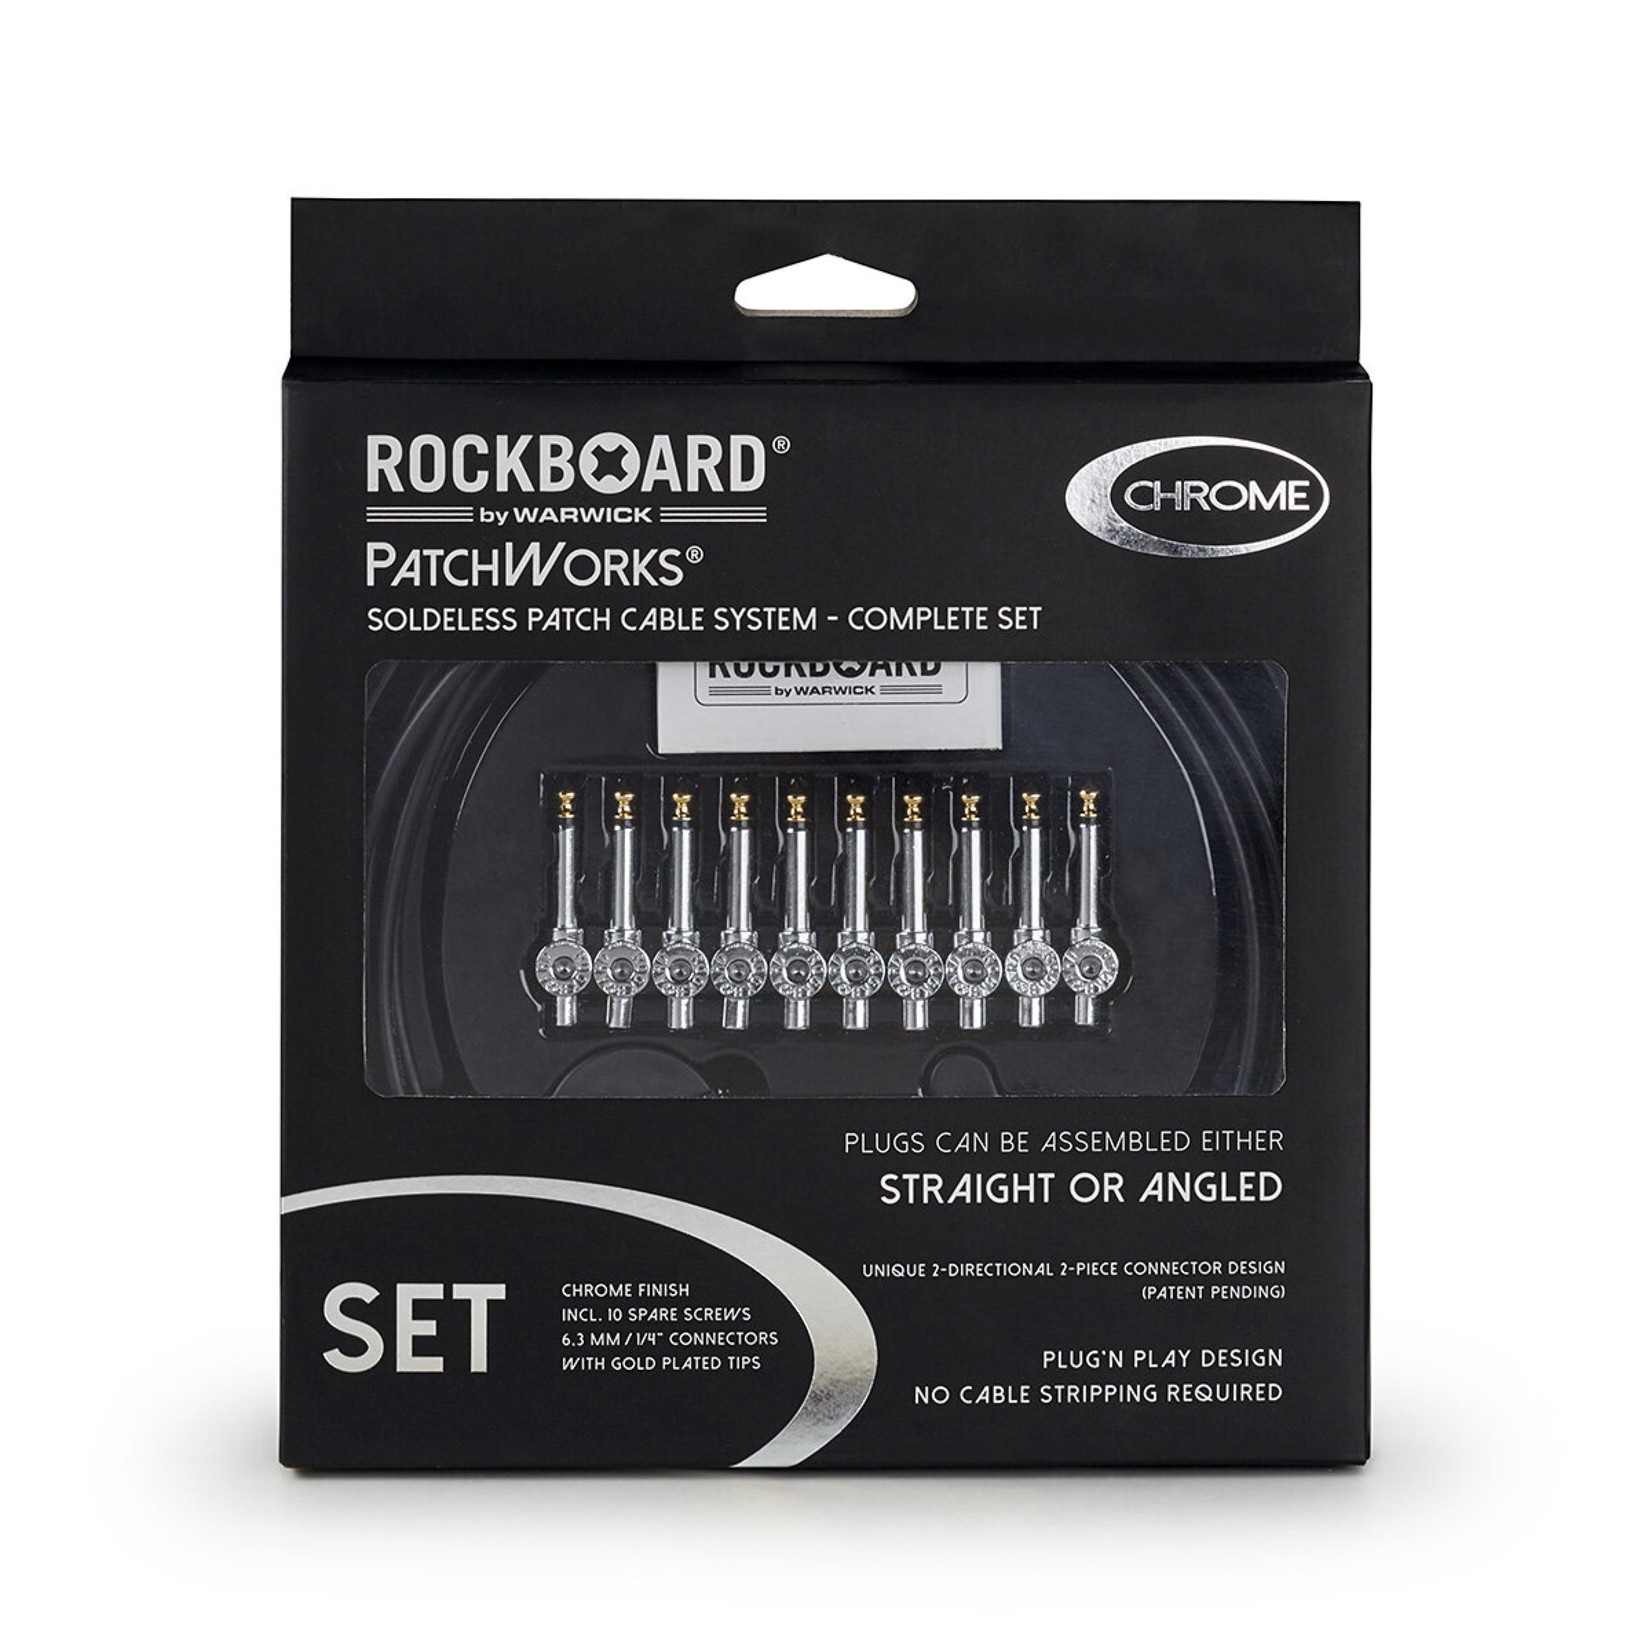 Rockboard Rockboard Patchworks Solderless Patch Cable Set, Chrome, 10 Plugs (rt angle or straight!) 3m Cable